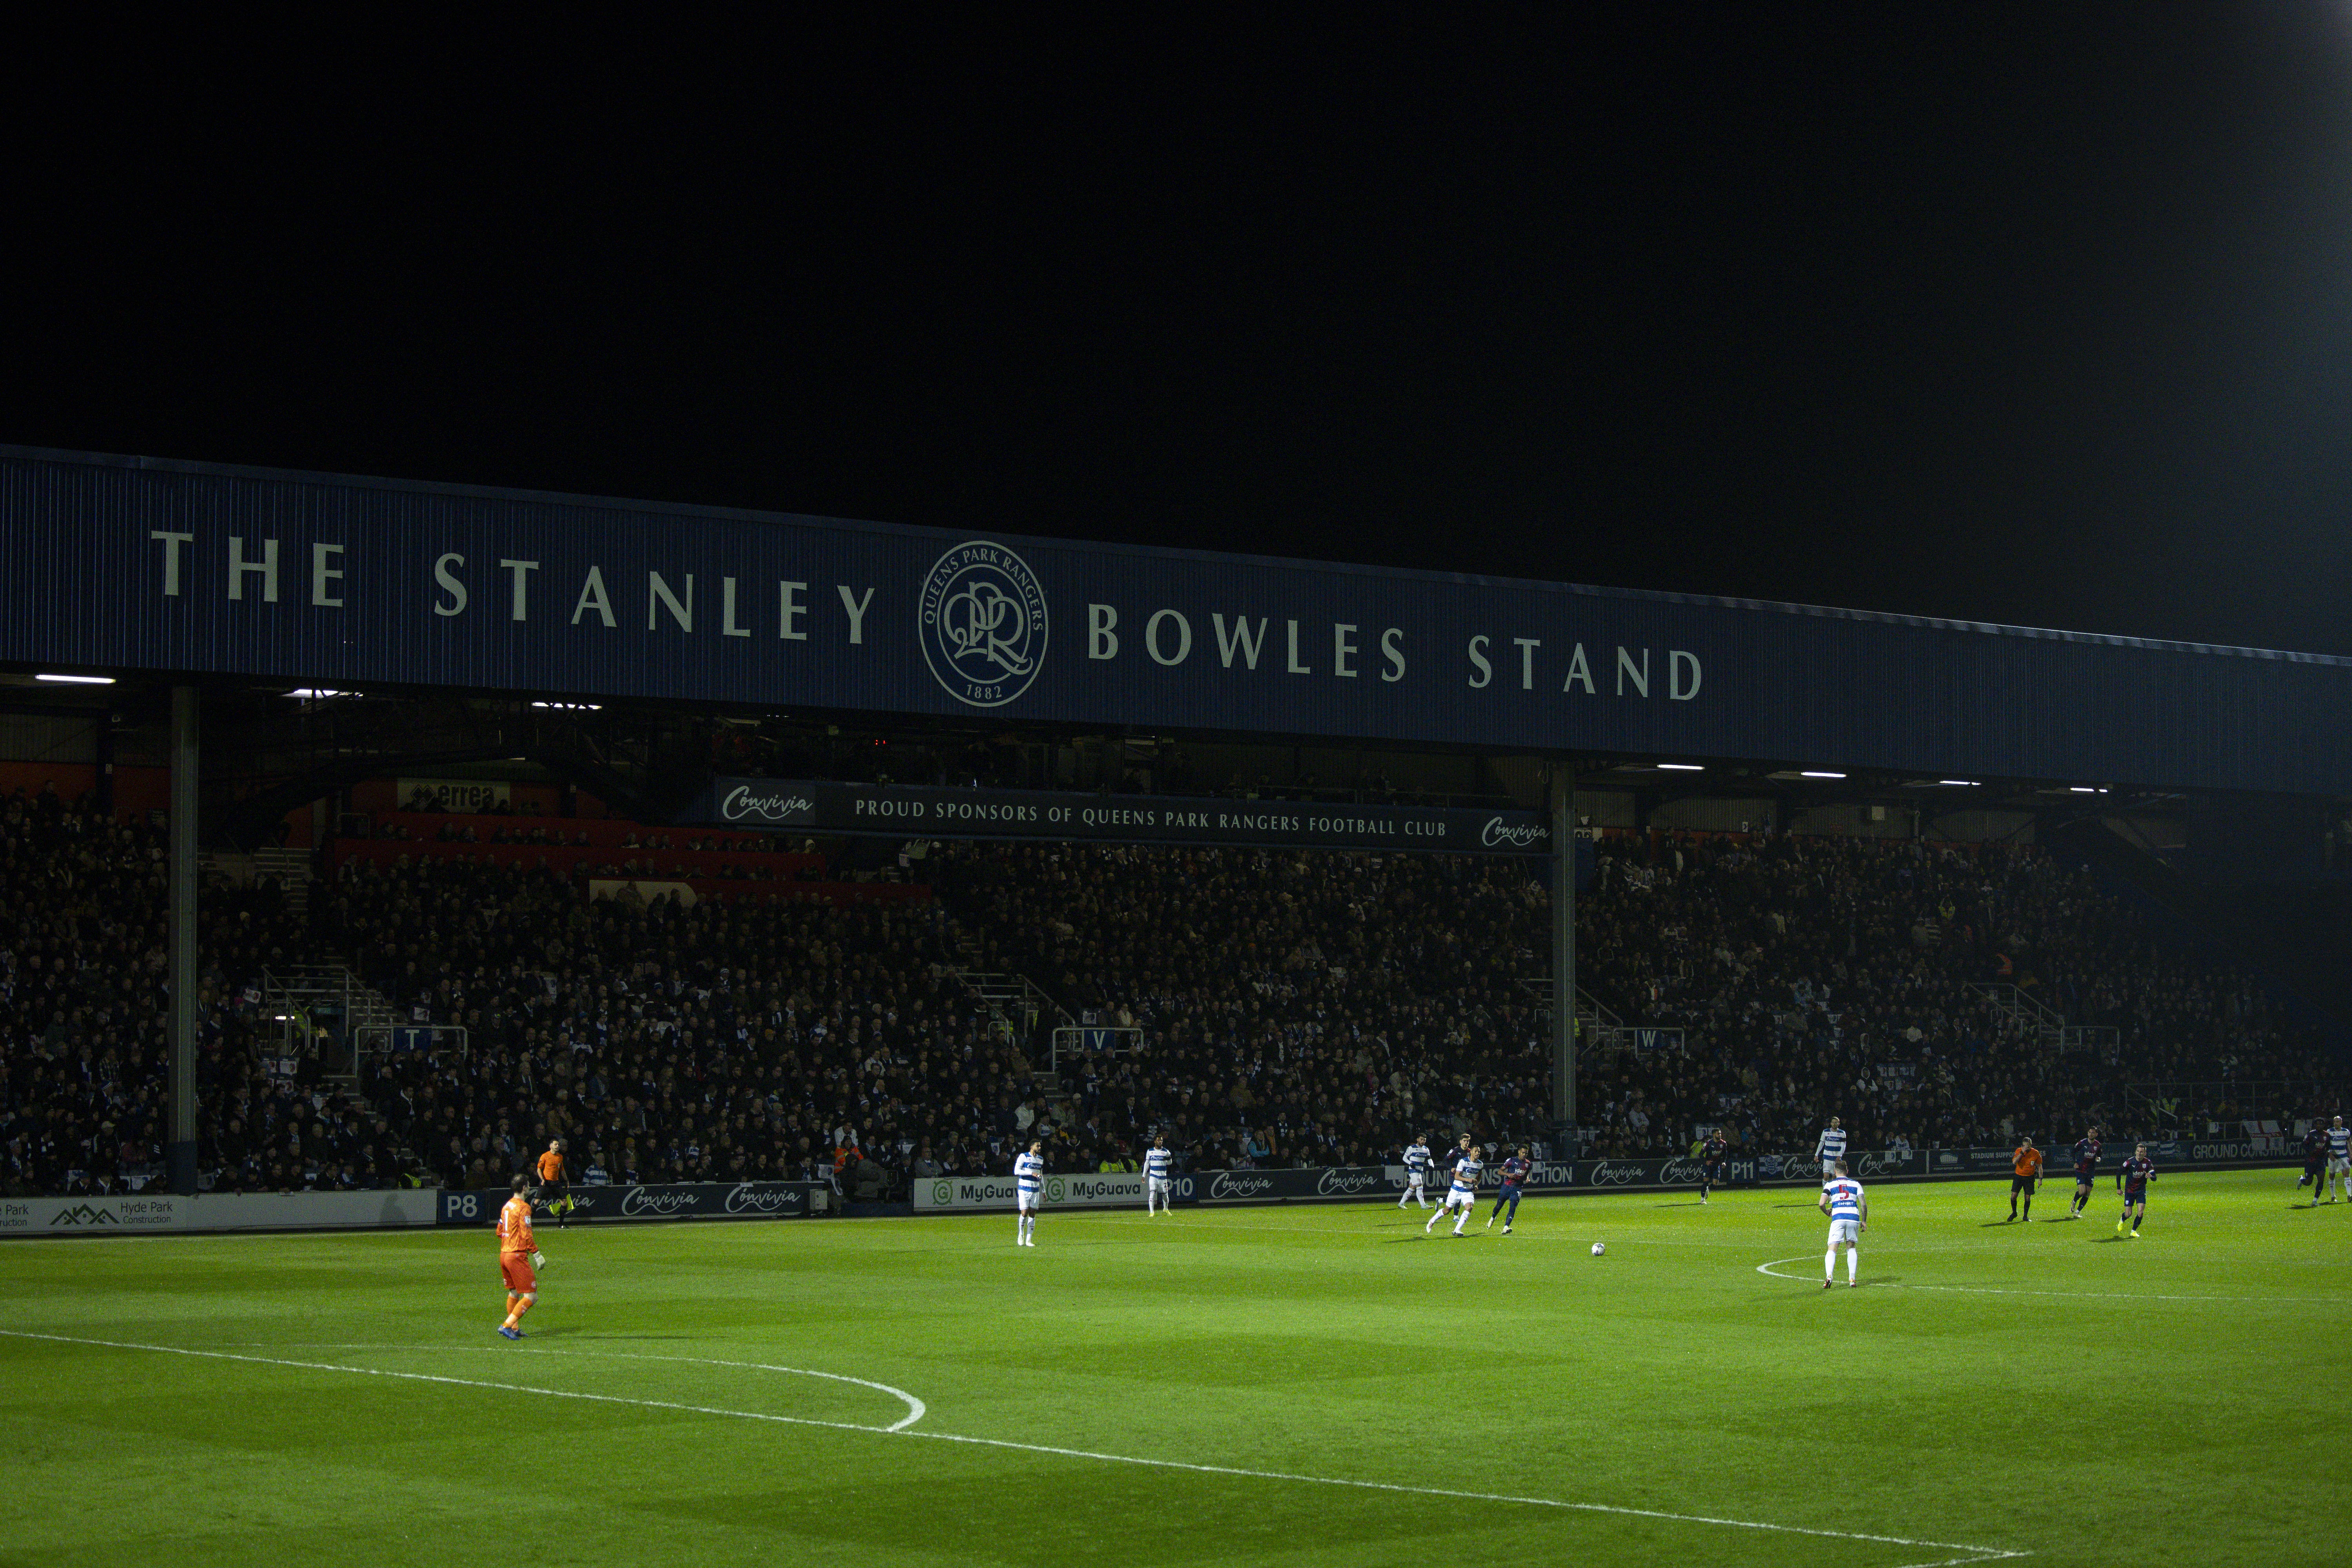 A general view of the Stan Bowles stand at Loftus Road while the QPR v Albion game was happening 